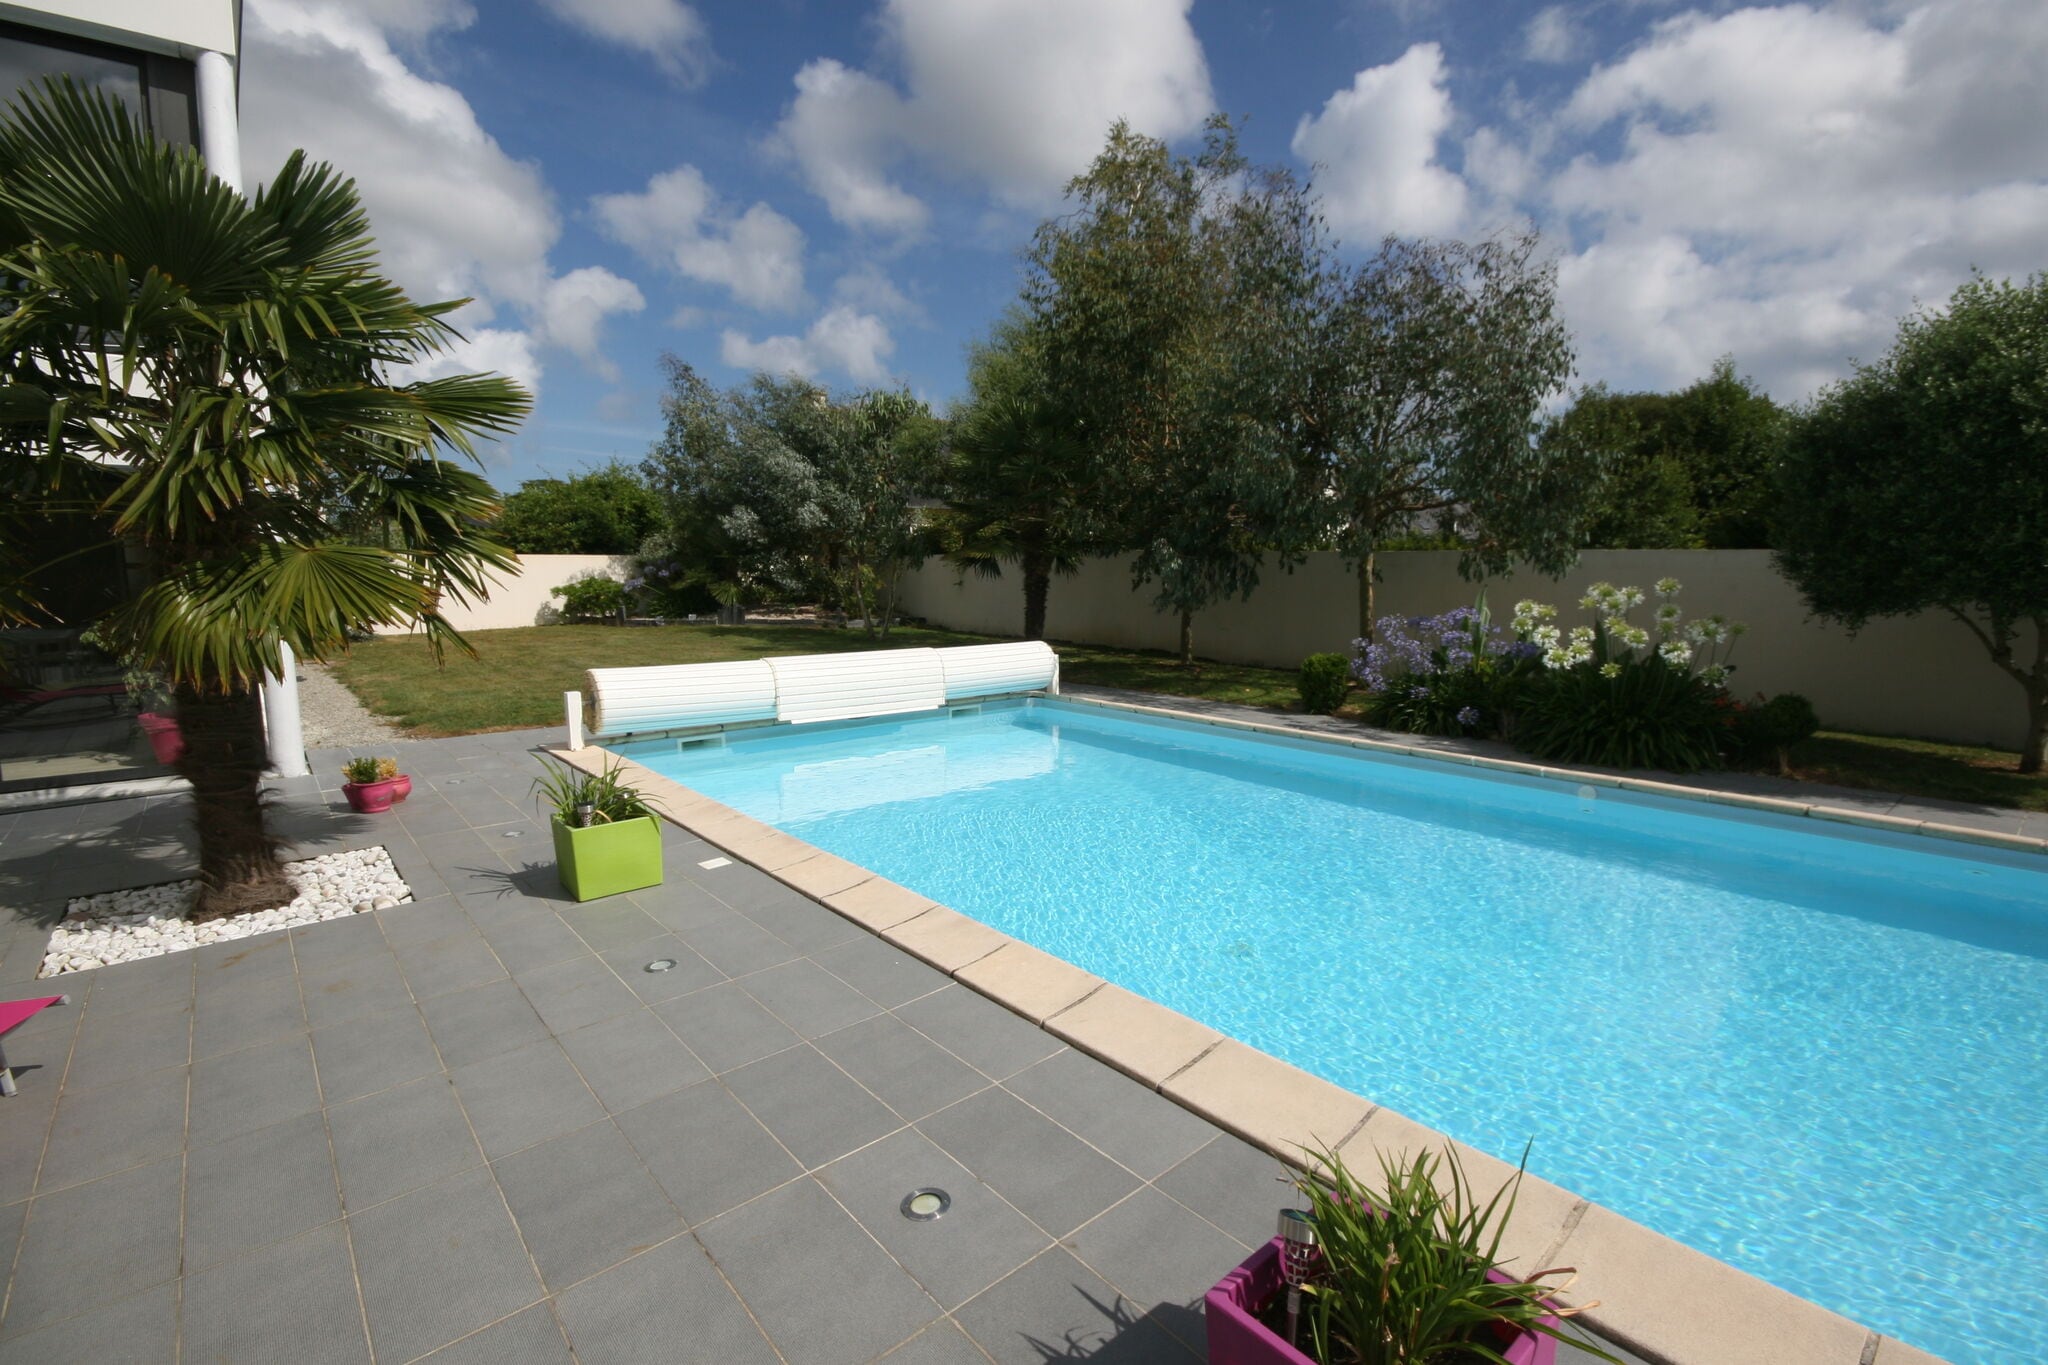 Modern villa with private heated pool, located 2 km from the sandy beach.